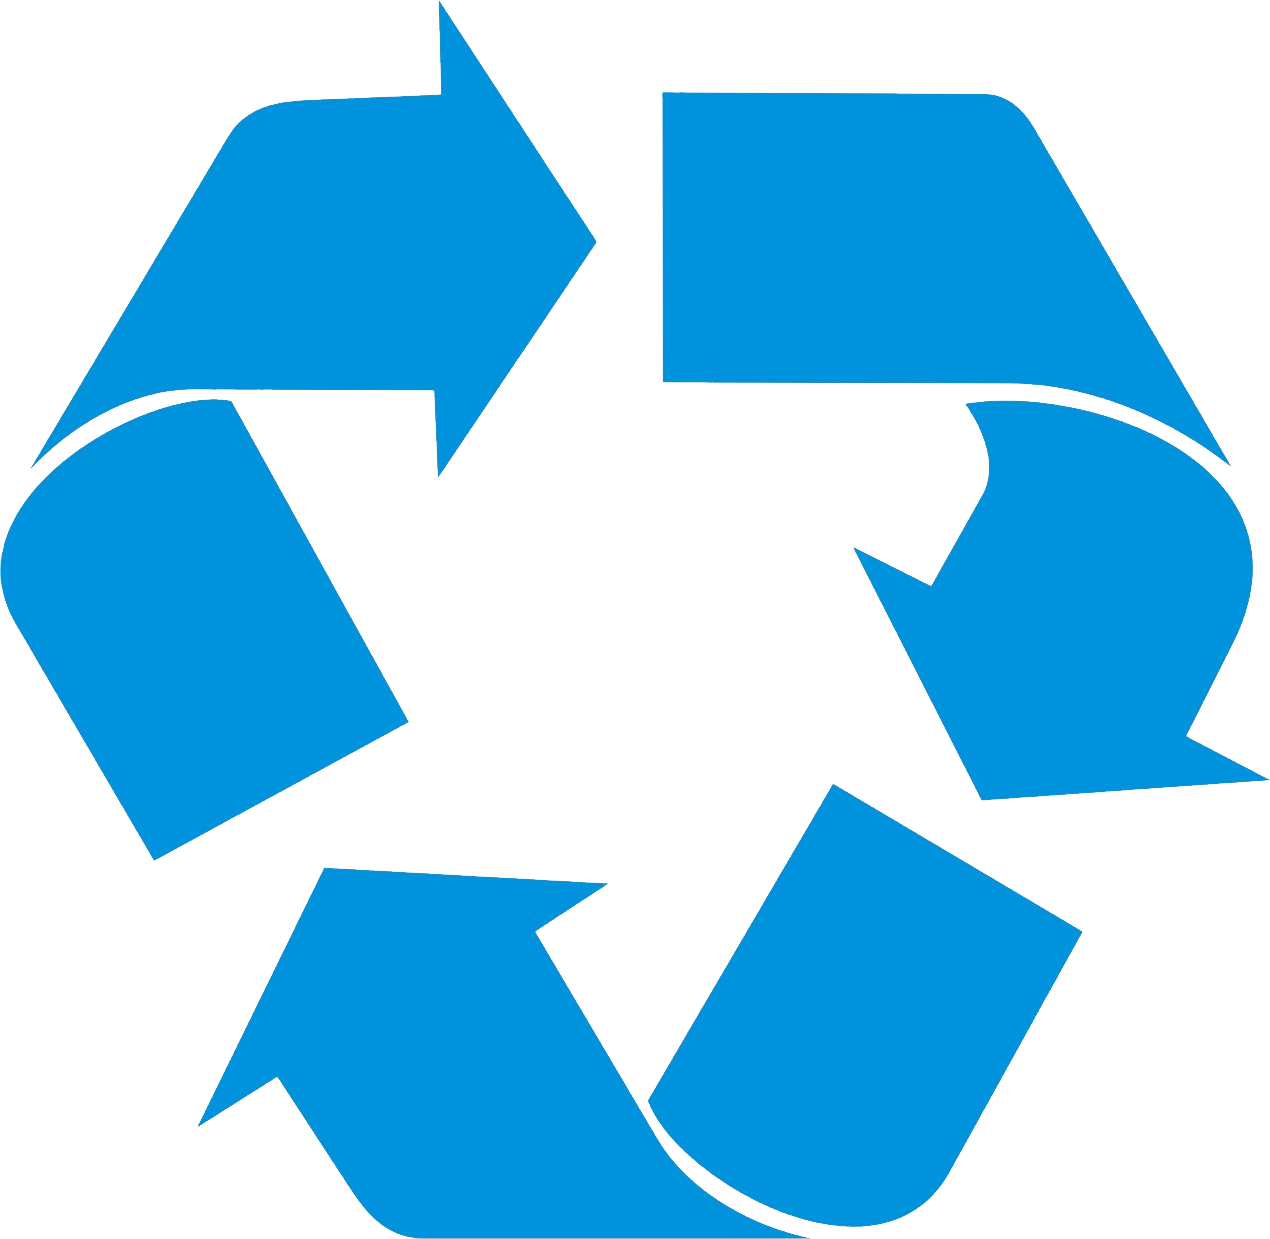 Paper Recycle Symbol Recycling Download Free Image PNG Image